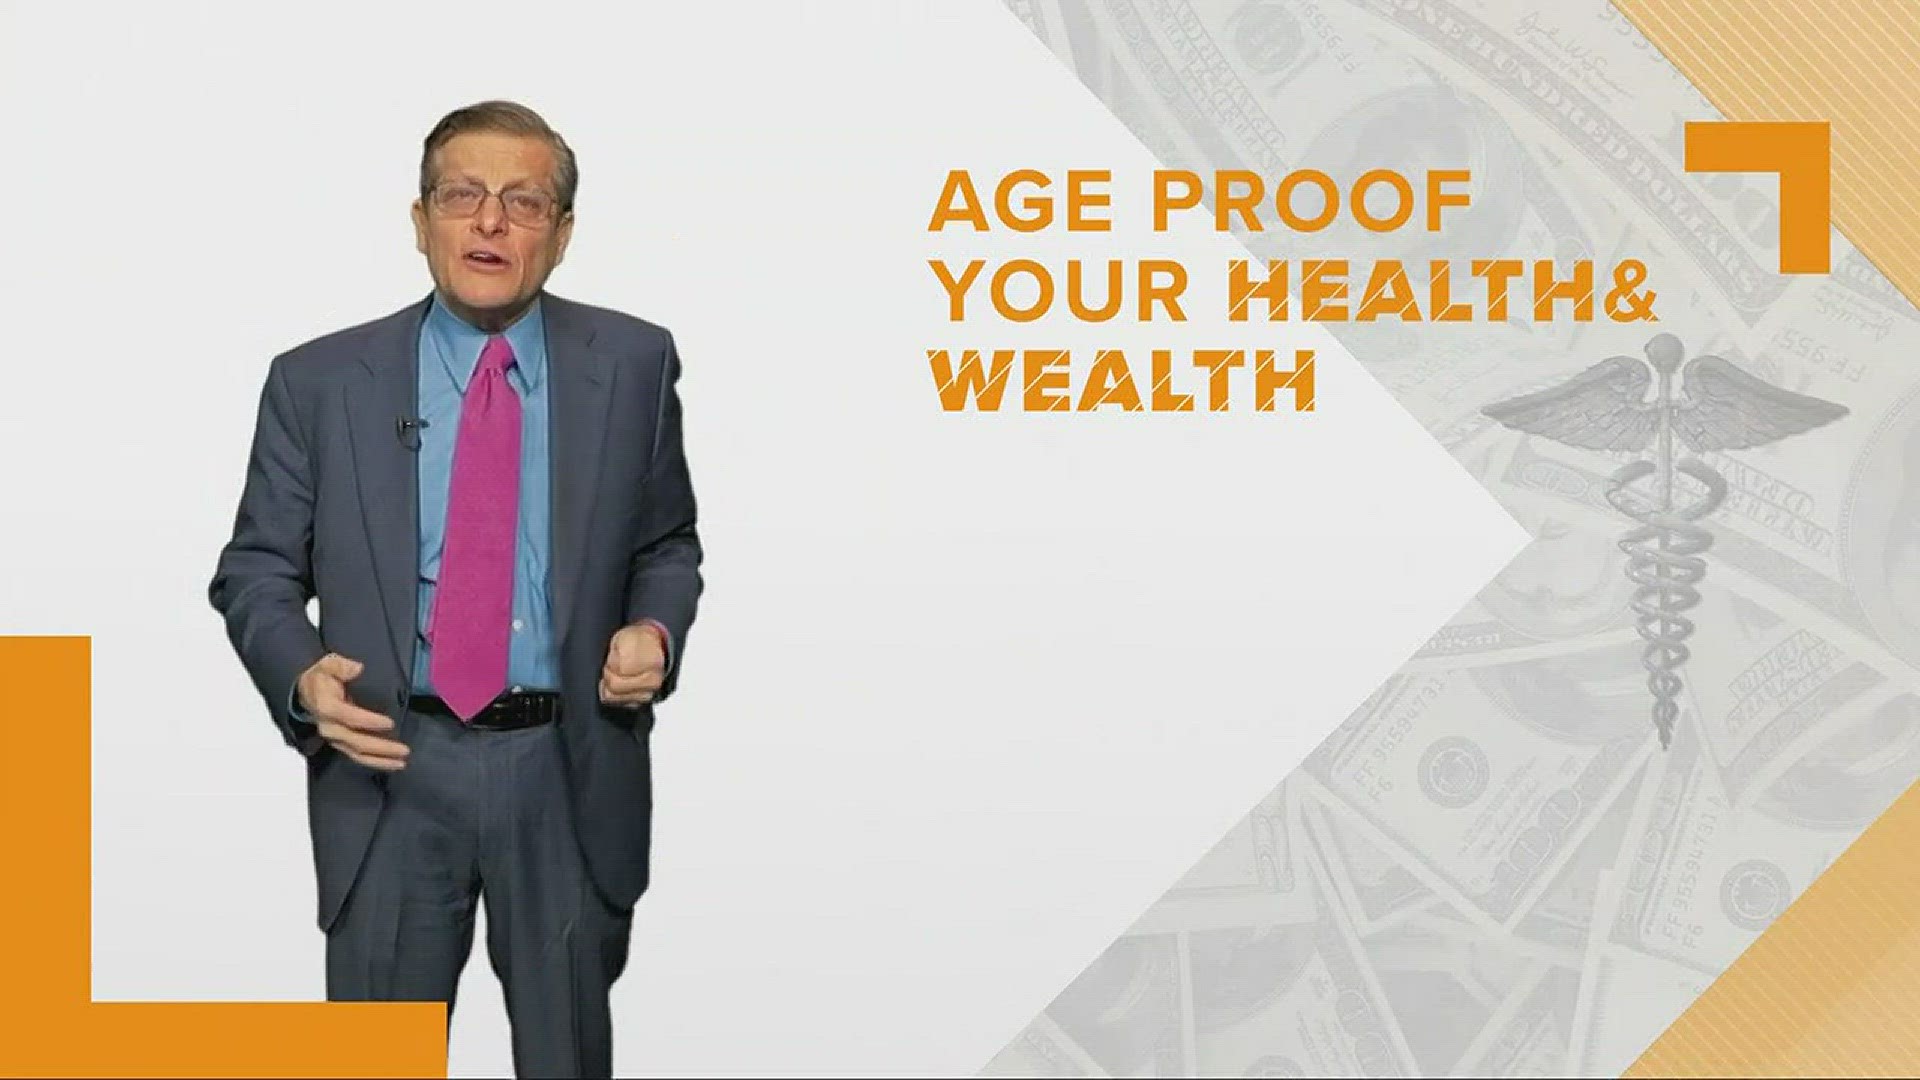 Get rid of the S's to age-proof your health.